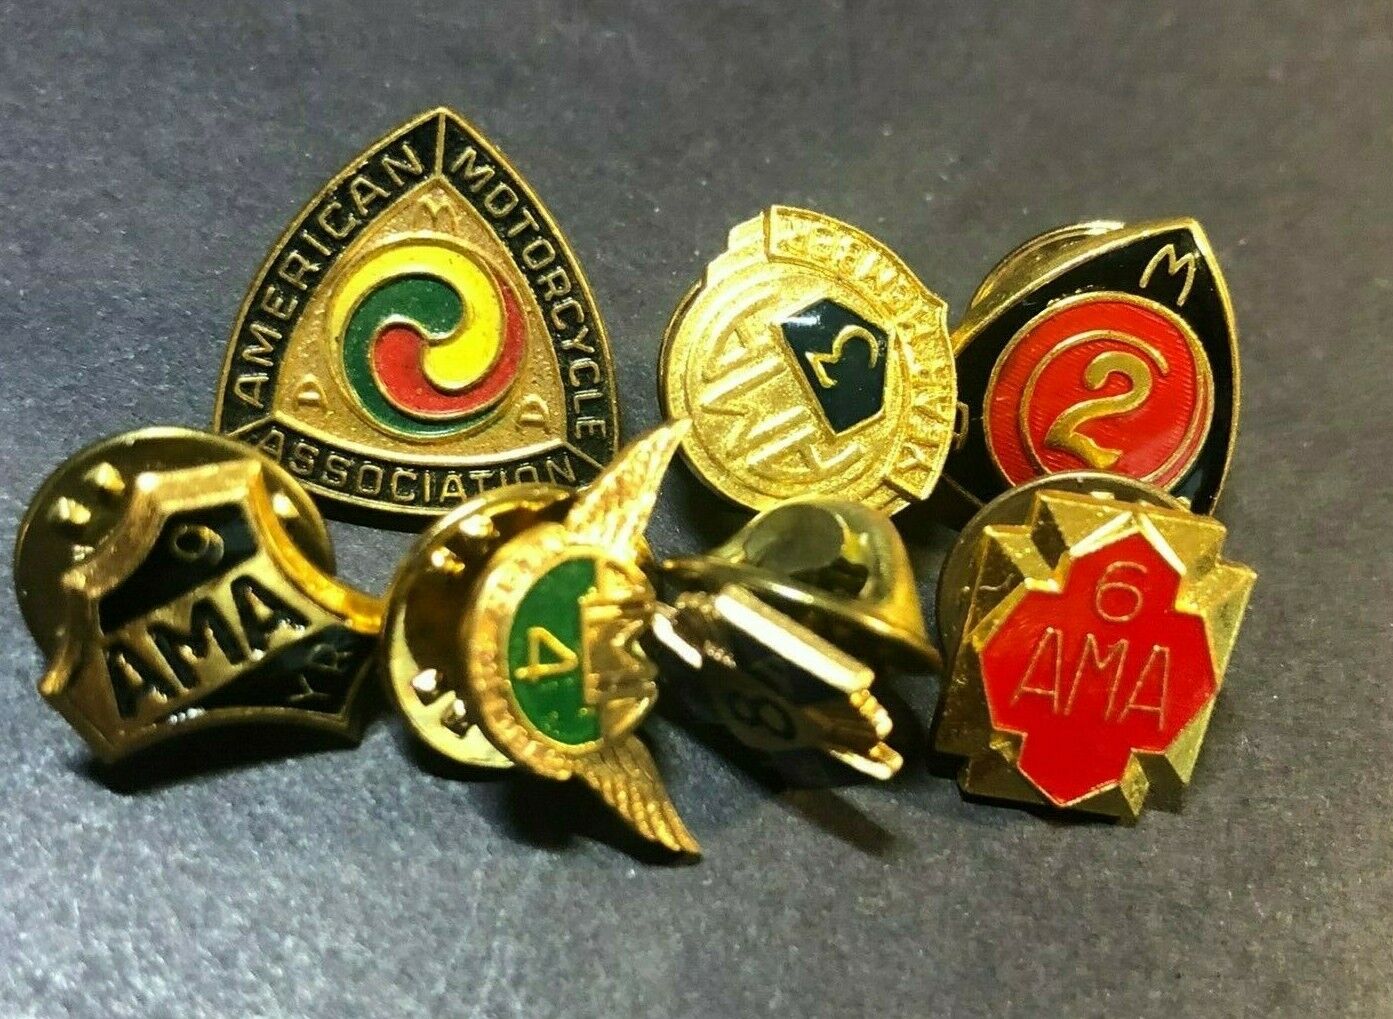 Group of 7 Vintage AMA American Motorcyclist Assc. Enameled Lapel Pins c1970\'s